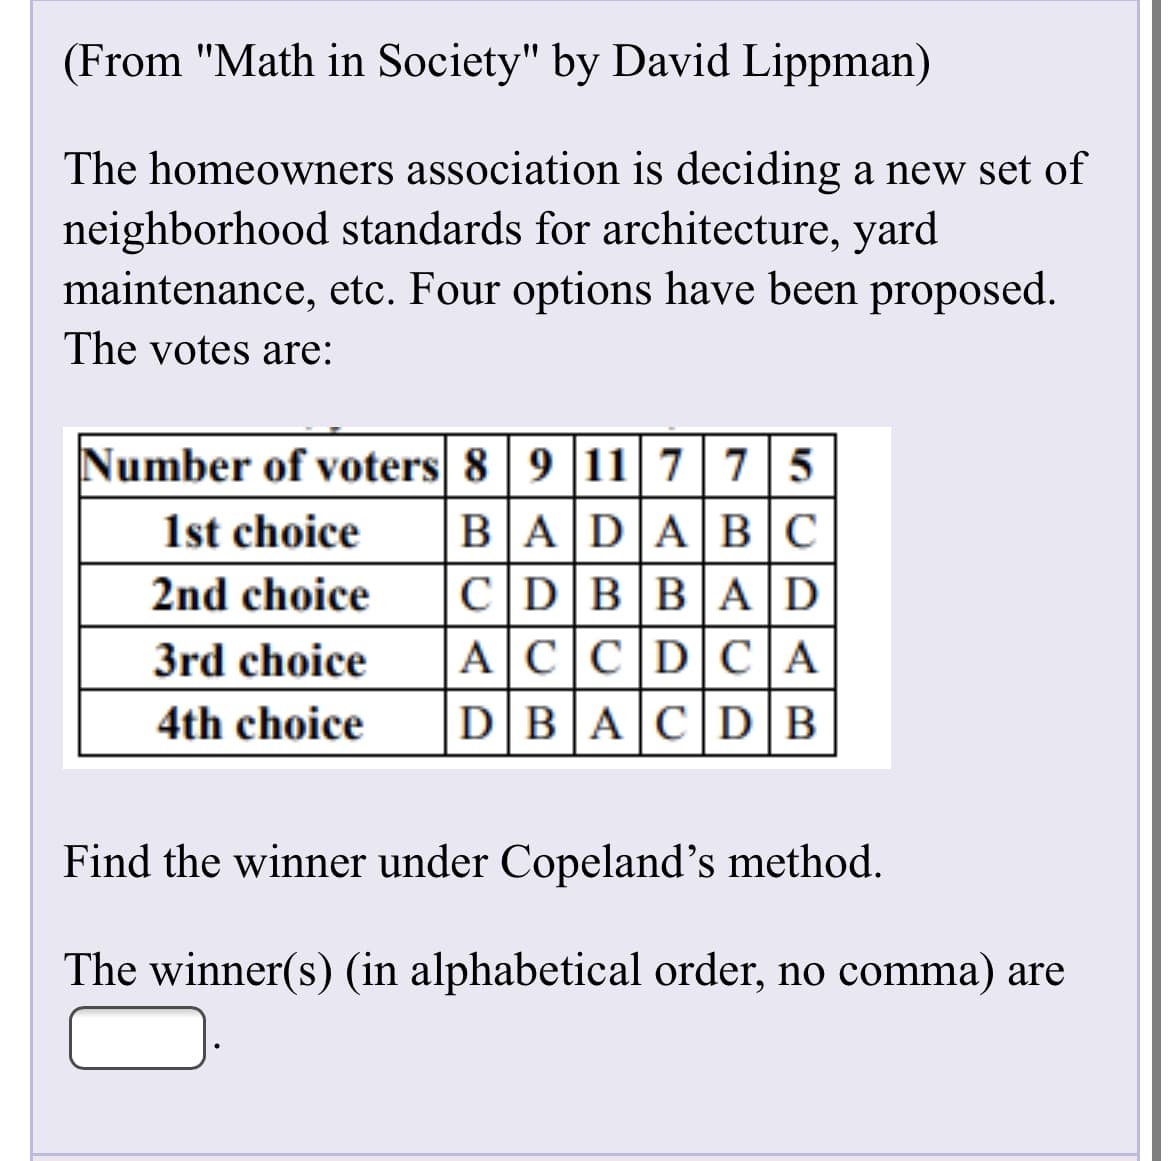 (From "Math in Society" by David Lippman)
The homeowners association is deciding a new set of
neighborhood standards for architecture, yard
maintenance, etc. Four options have been proposed.
The votes are:
Number of voters 8 9 11|775
1st choice
BADABC
CDBBAD
ACC|DCA
2nd choice
3rd choice
4th choice
DBACD|B
Find the winner under Copeland's method.
The winner(s) (in alphabetical order, no comma) are
